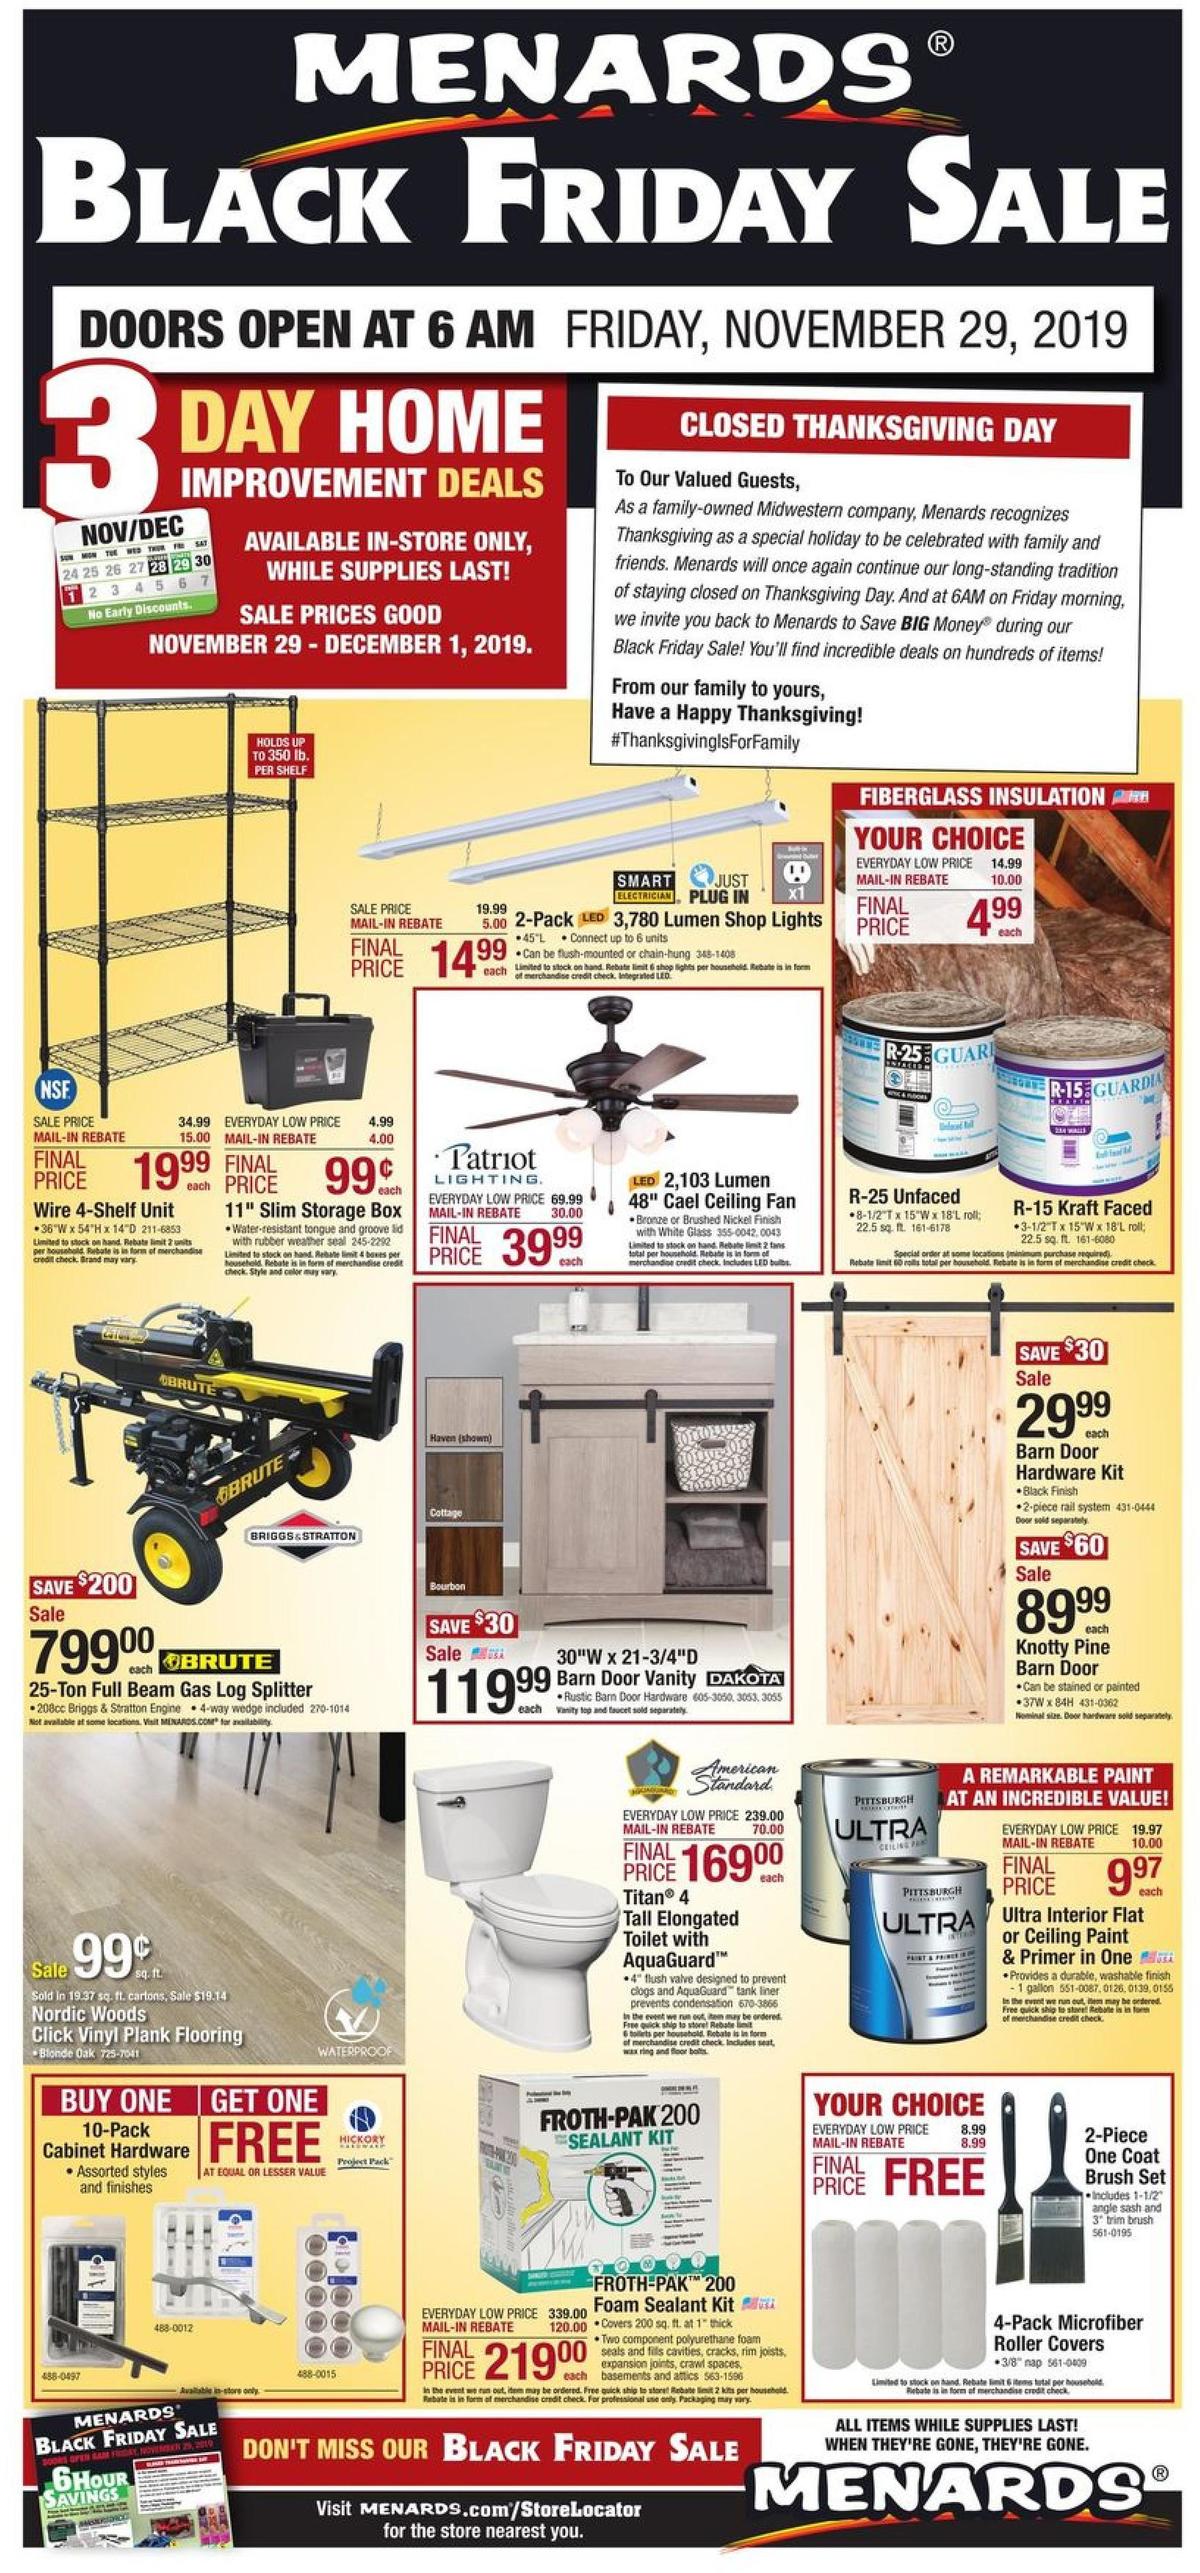 Menards Black Friday Sale - Three Day Weekly Ads & Special Buys for November 29